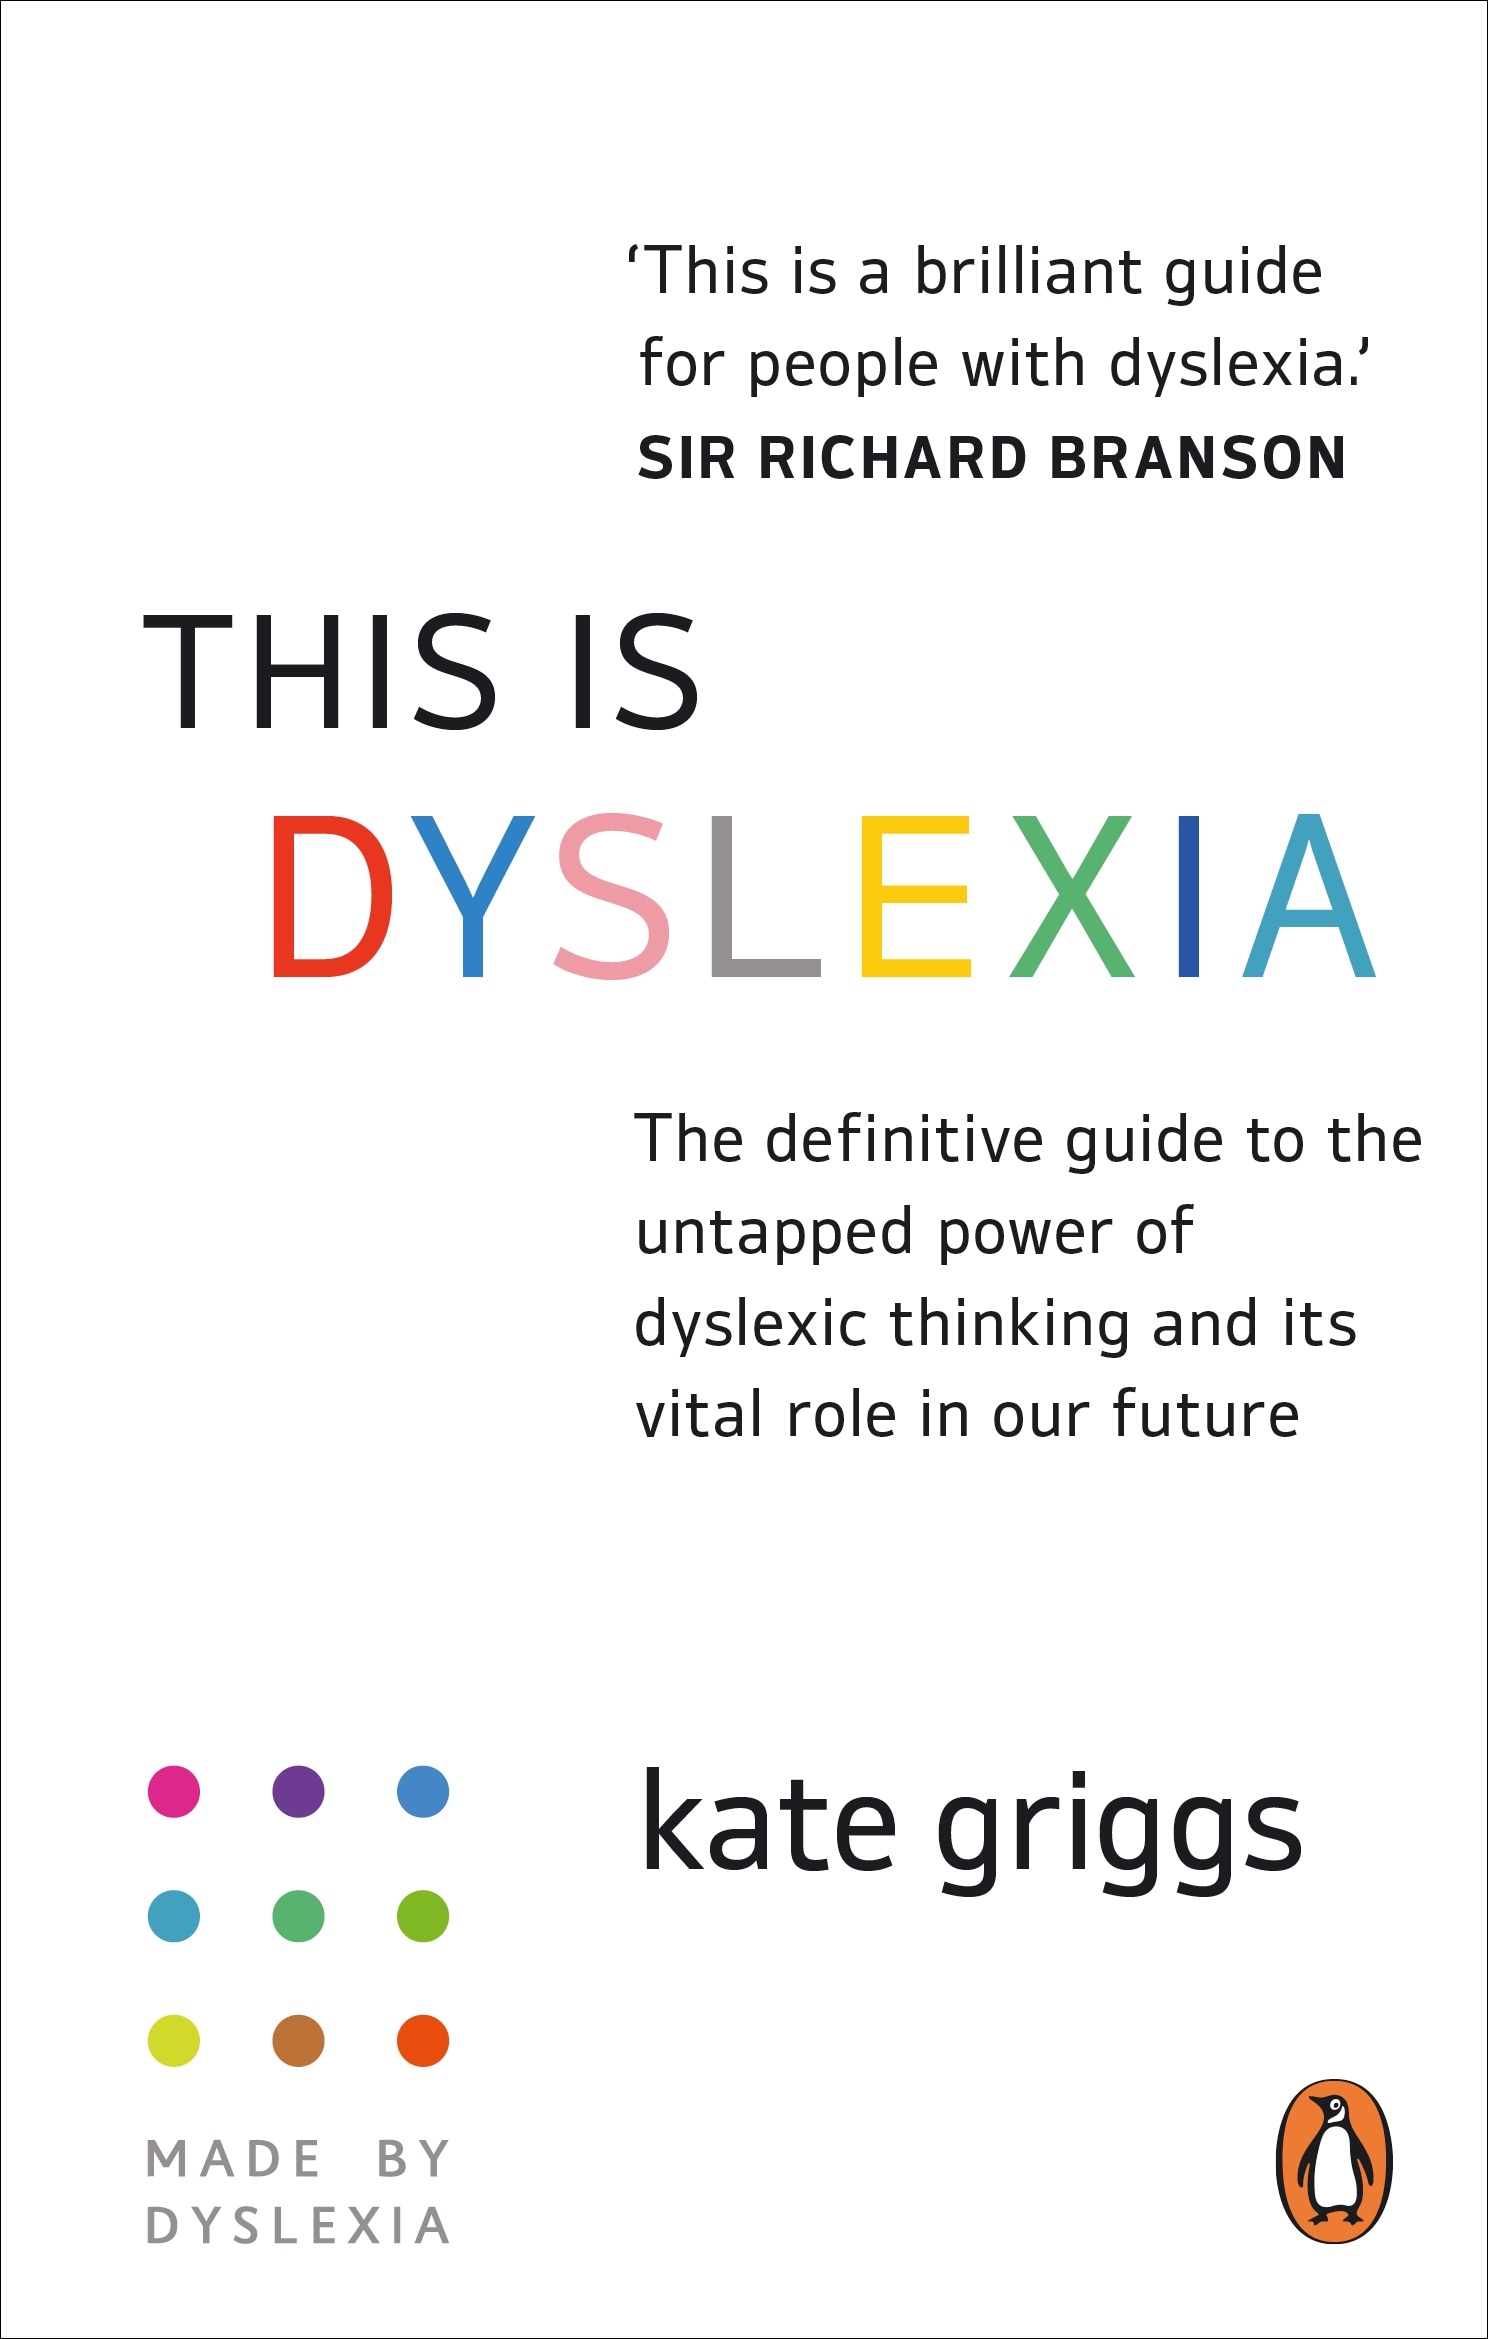 Book “This is Dyslexia” by Kate Griggs — October 7, 2021